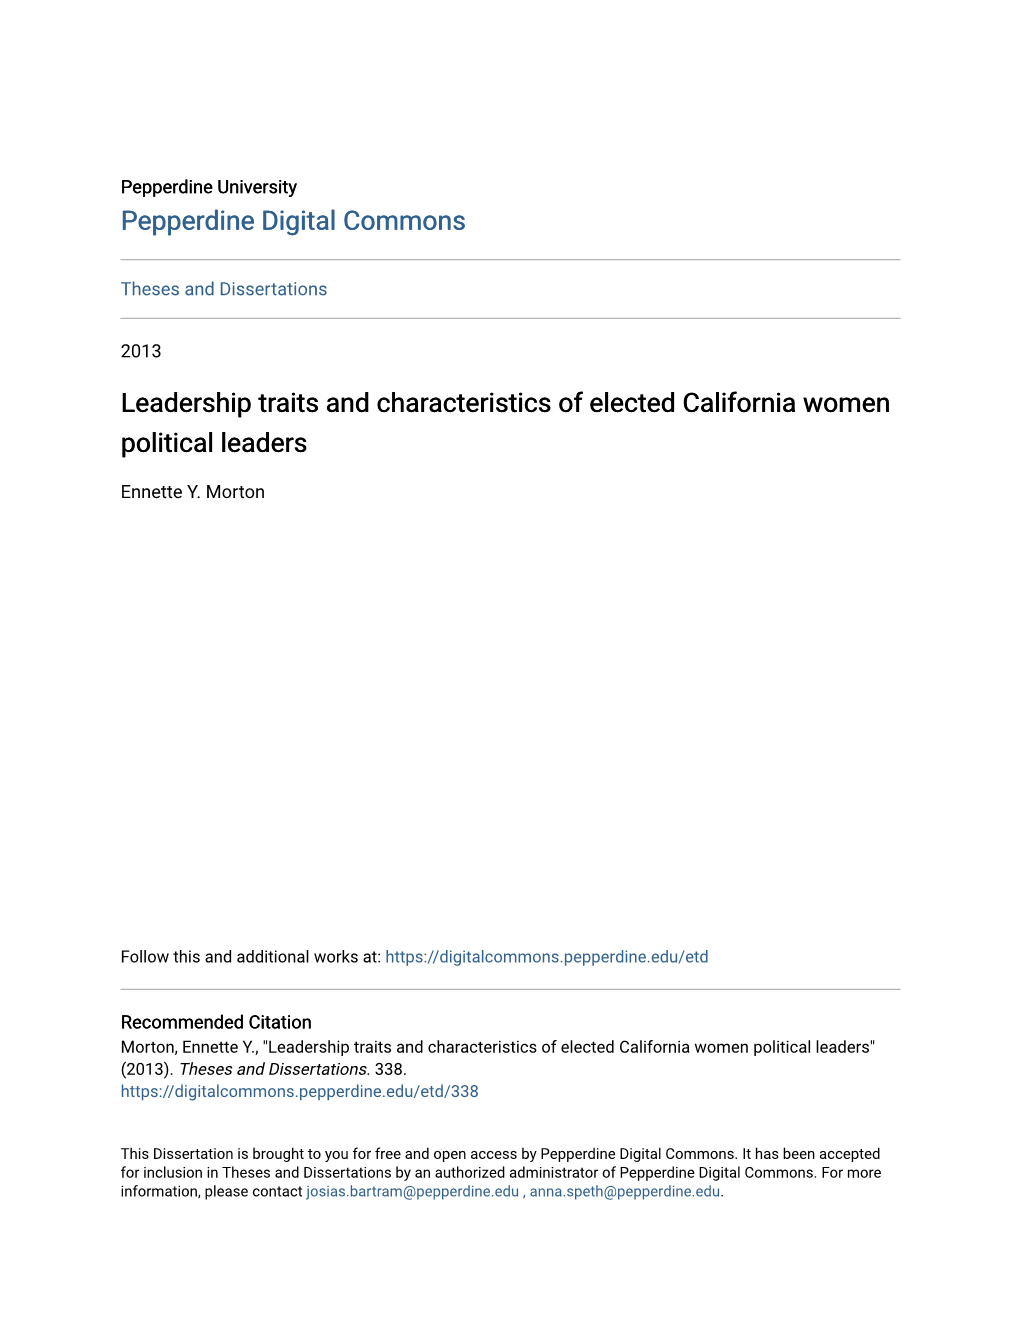 Leadership Traits and Characteristics of Elected California Women Political Leaders